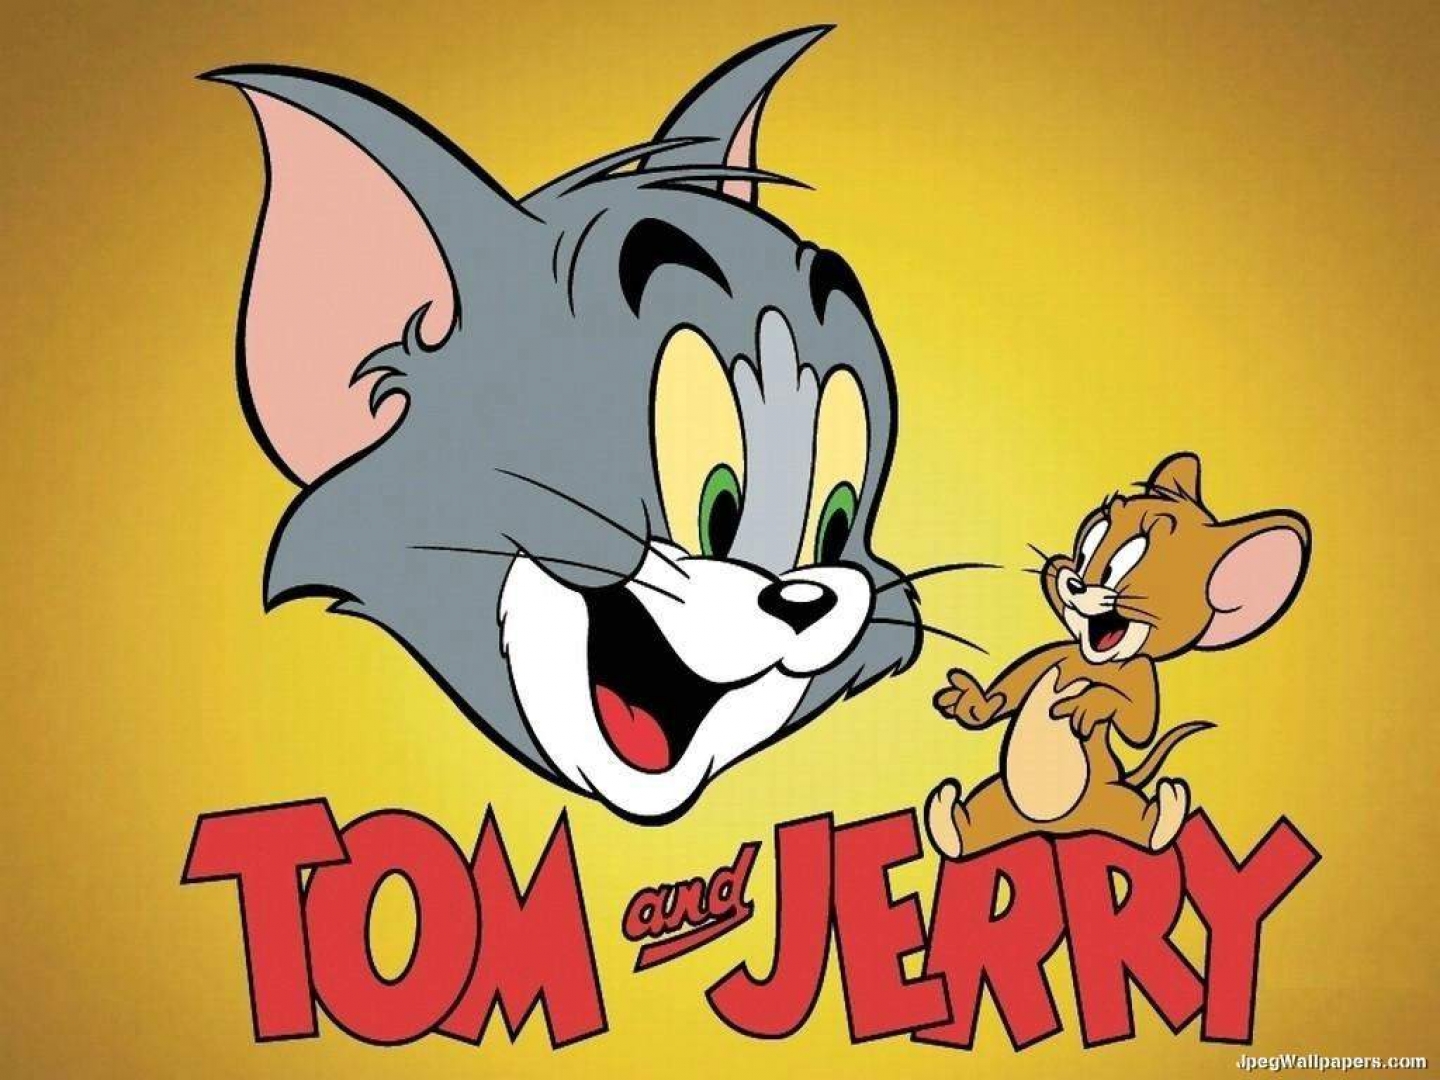 Find the best tom and jerry cute wallpapers for your phone and tablet